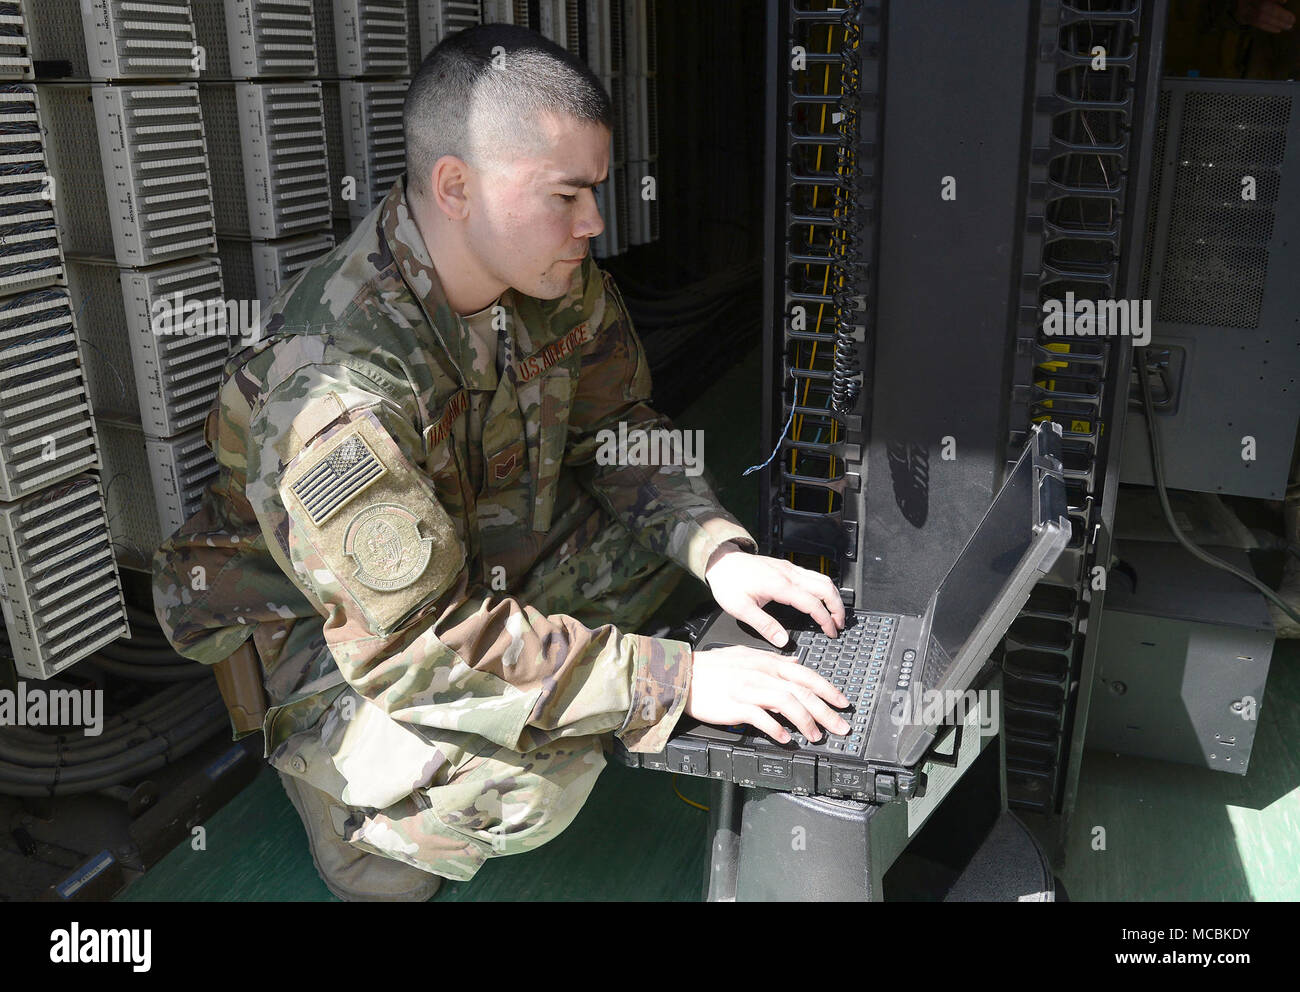 Staff Sgt. Brandon Hasegawa, 455th Expeditionary Communication Squadron cyber transport technician, activates a network port Mar. 22, 2018 at Bagram Airfield, Afghanistan. In addition to maintaining and managing the network, Hasegawa stays busy dealing with vulnerability issues, testing and troubleshooting network systems equipment as well as port activations. Stock Photo